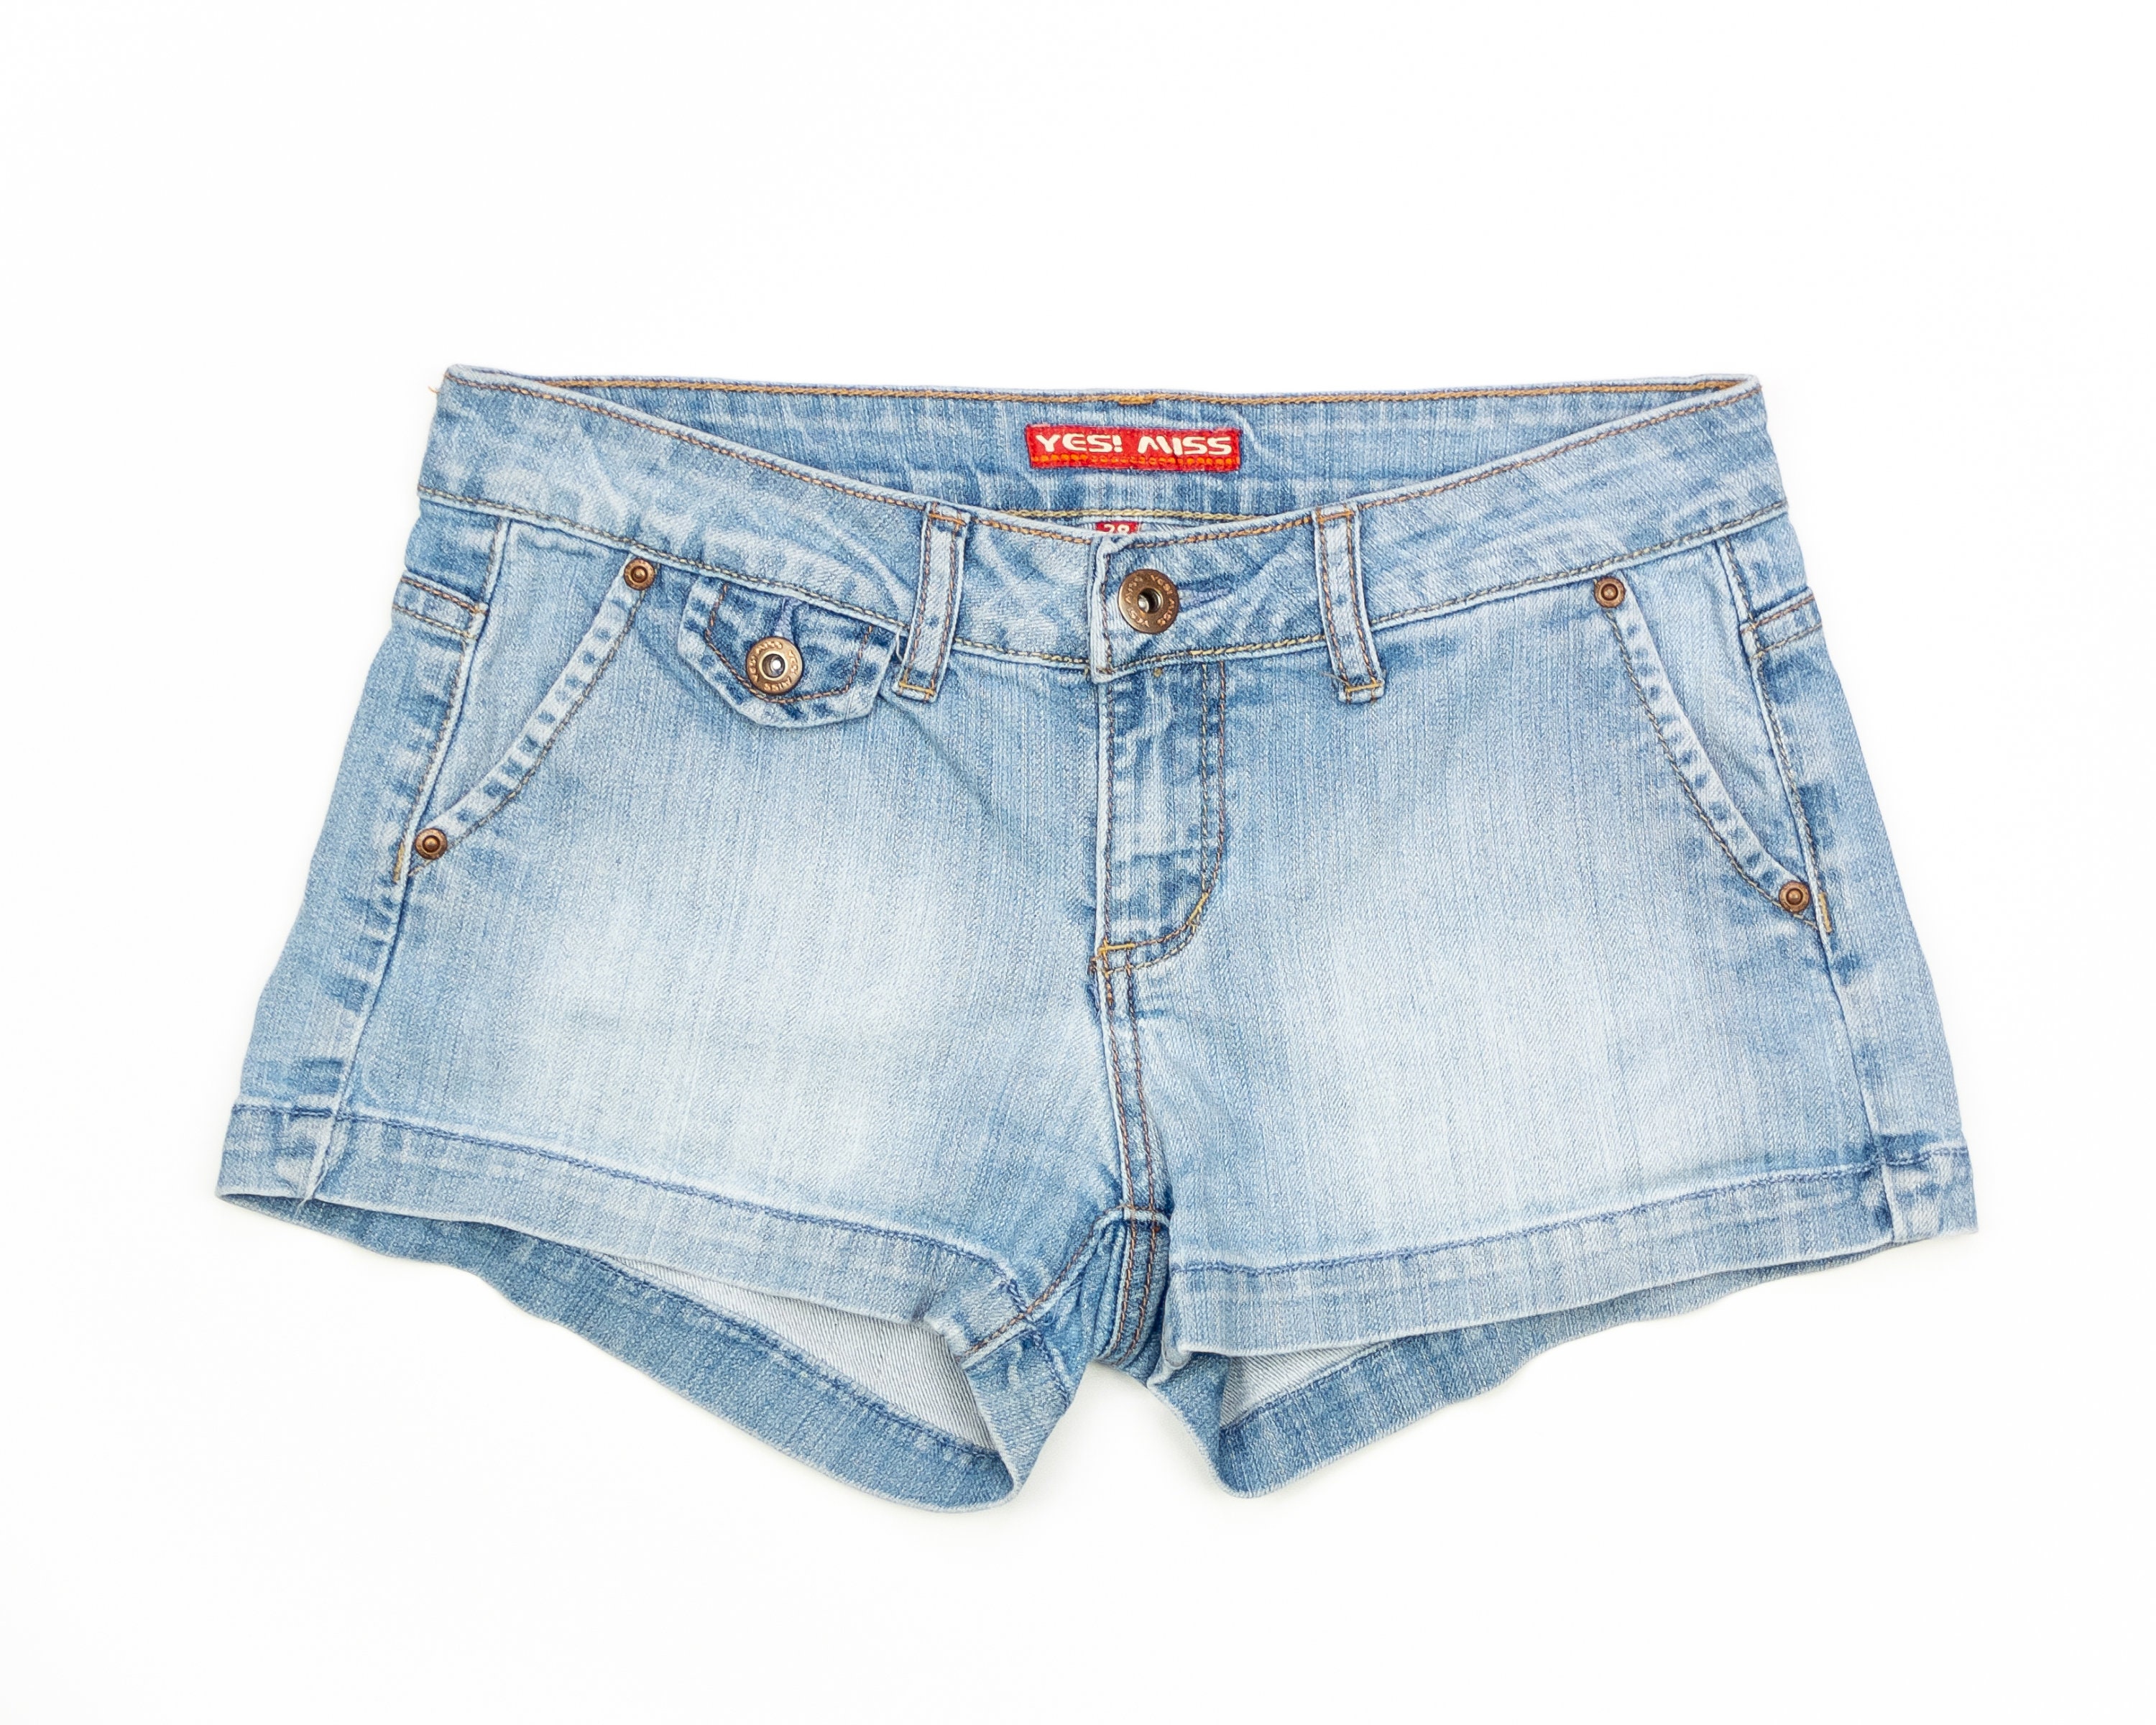 Y2K BOOTY Shorts / 00s Low Rise Shorts / Vintage DENIM Shorts / Hips 38  Inches / Waist 28 Inches -  Denmark